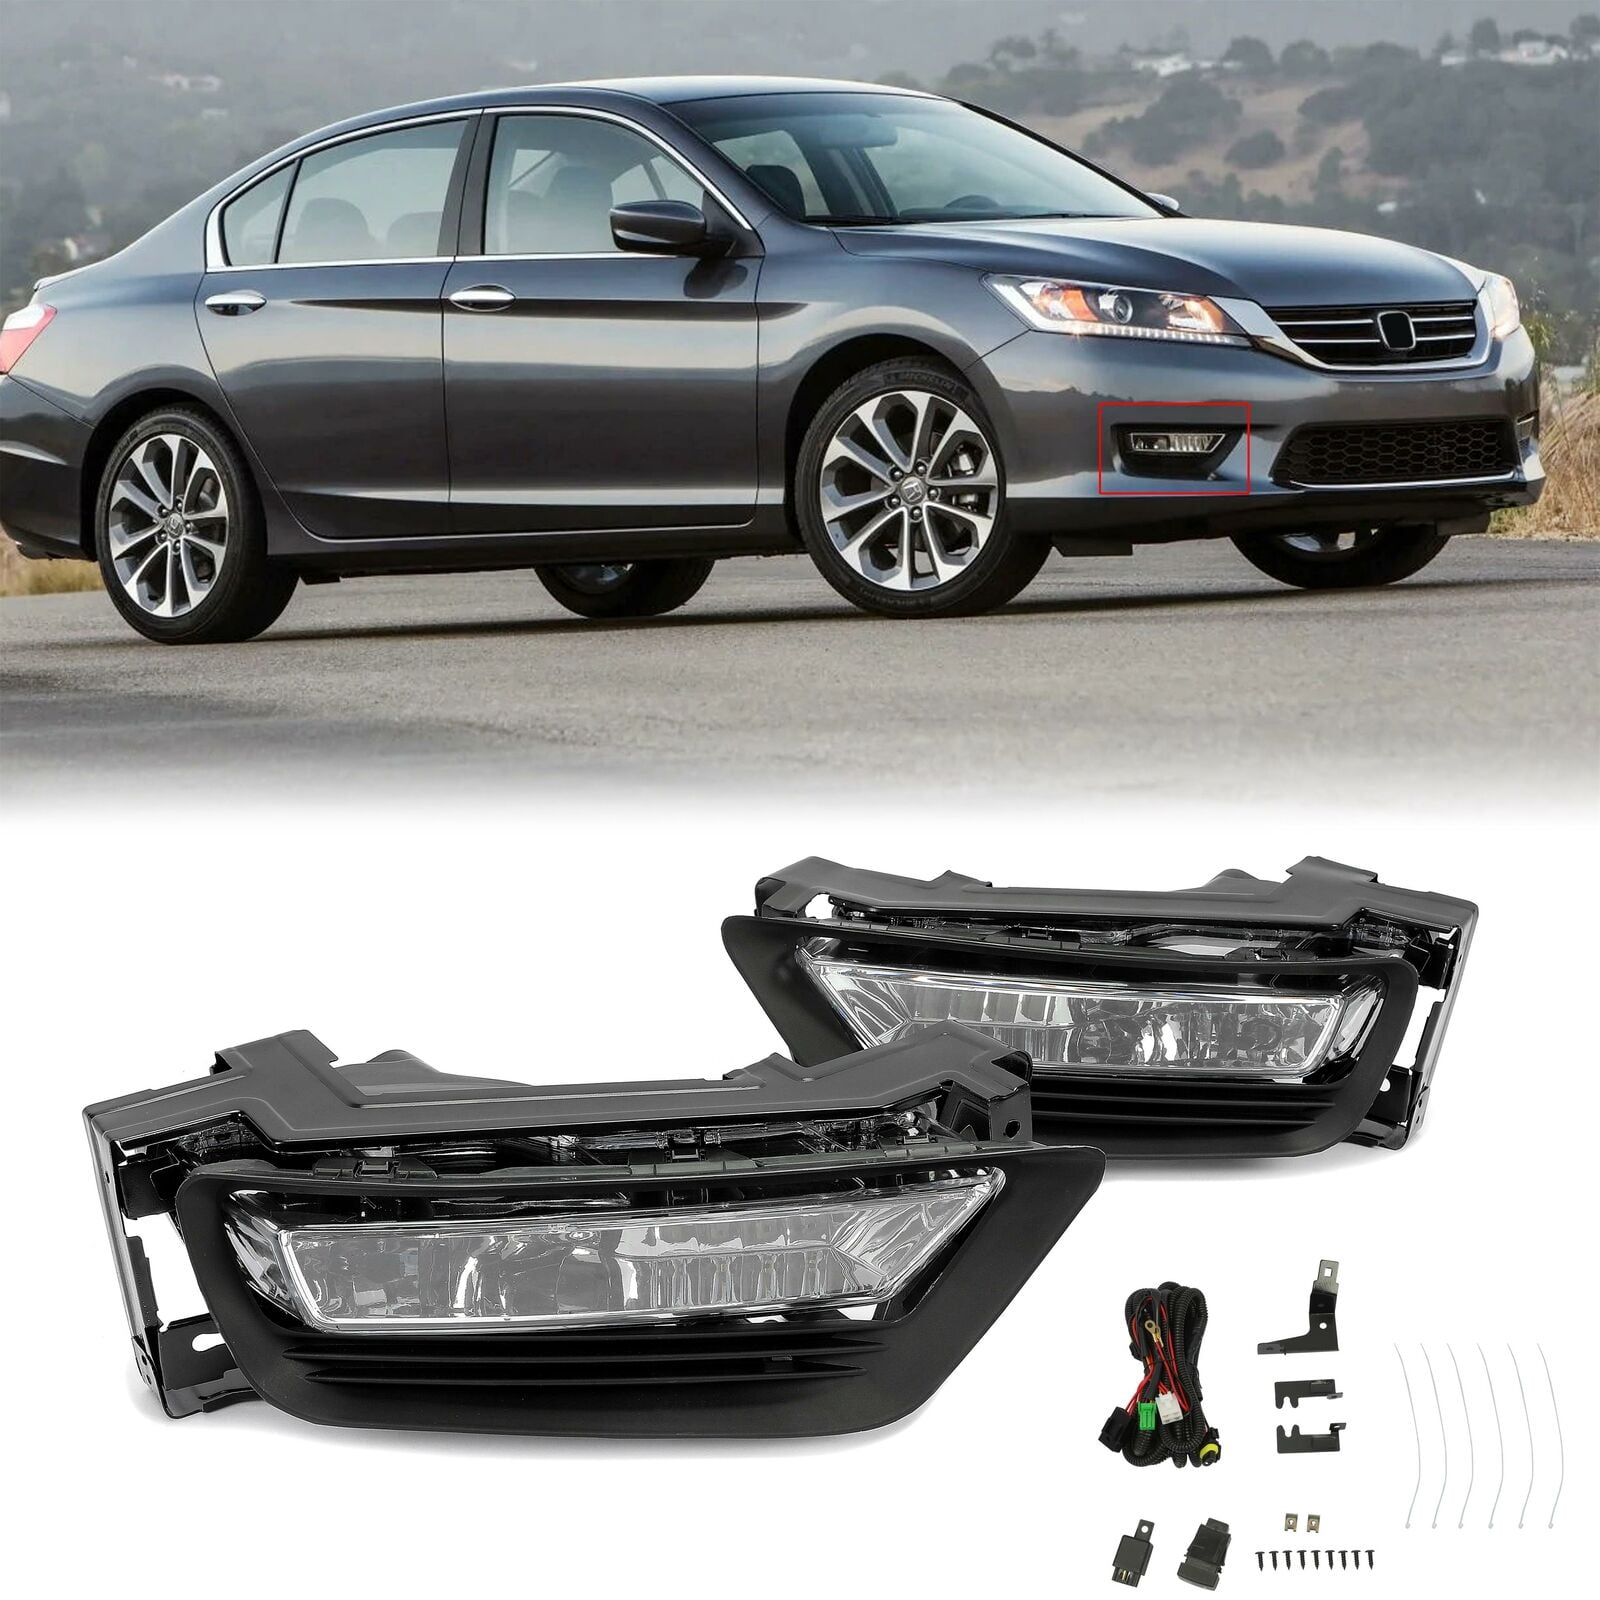 Wiring Switch Kit PIT66 Fog Lights Compatible with 08-10 Honda Accord Front Fog Light Lamp 